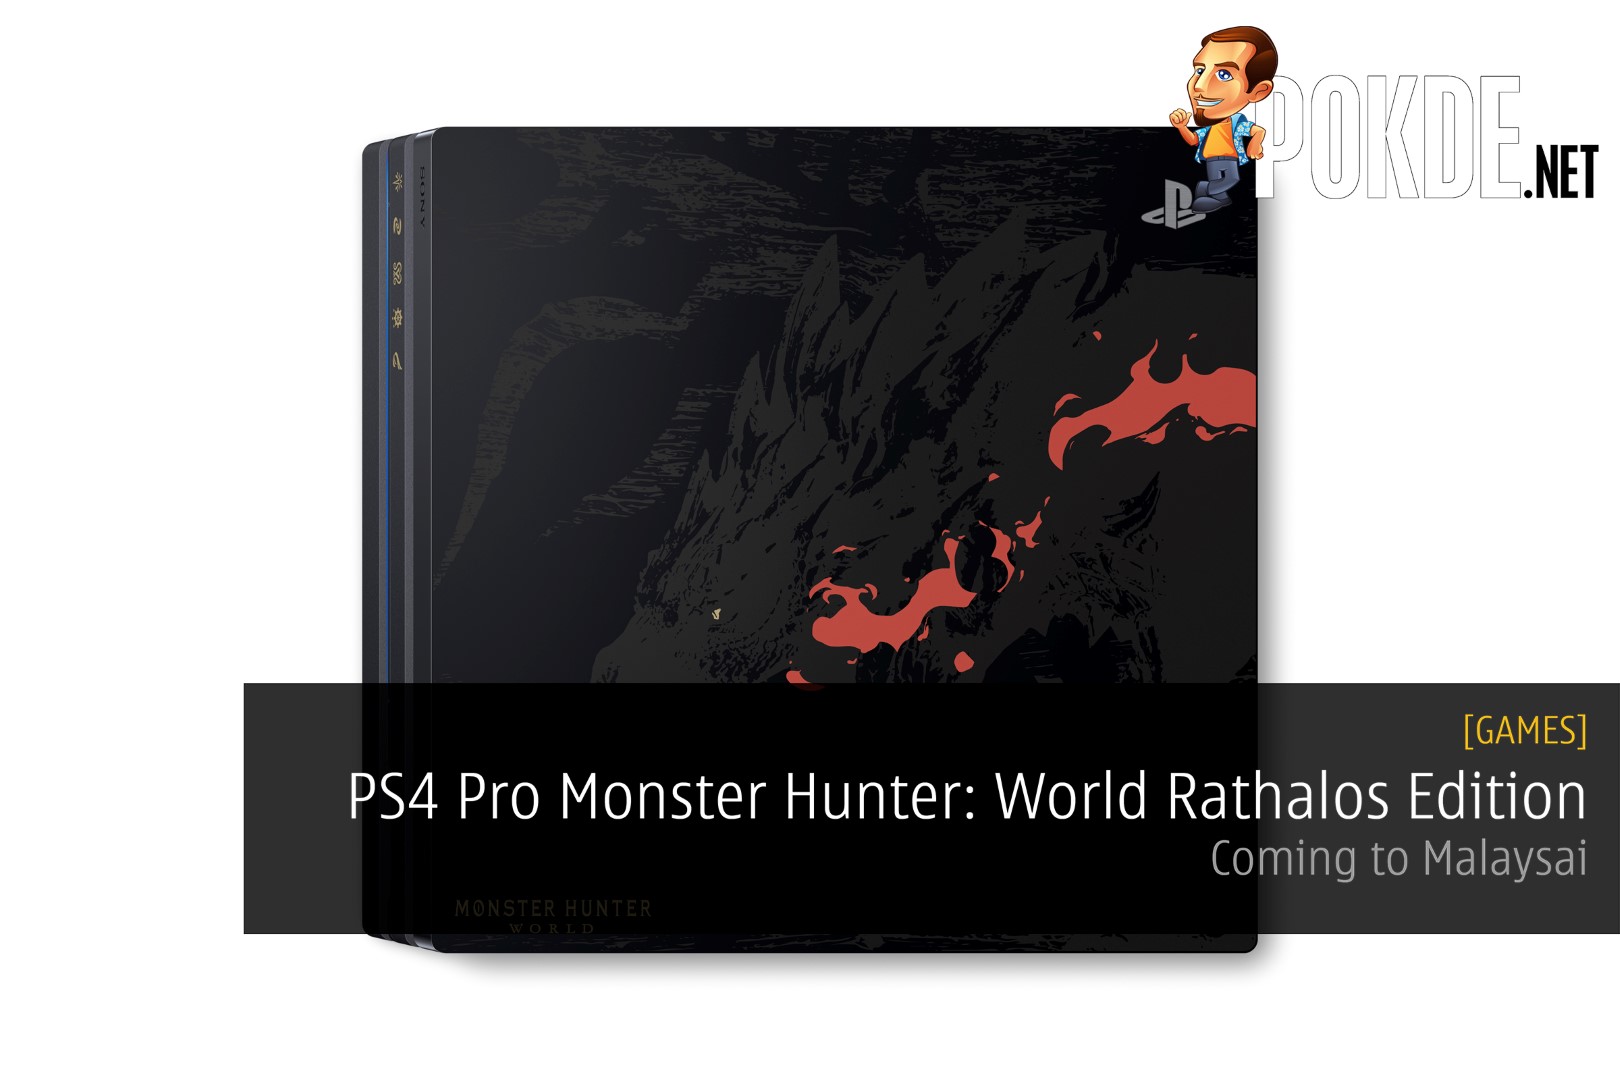 PS4 Pro Monster Hunter: World Rathalos Edition Is Coming To Malaysia! 29